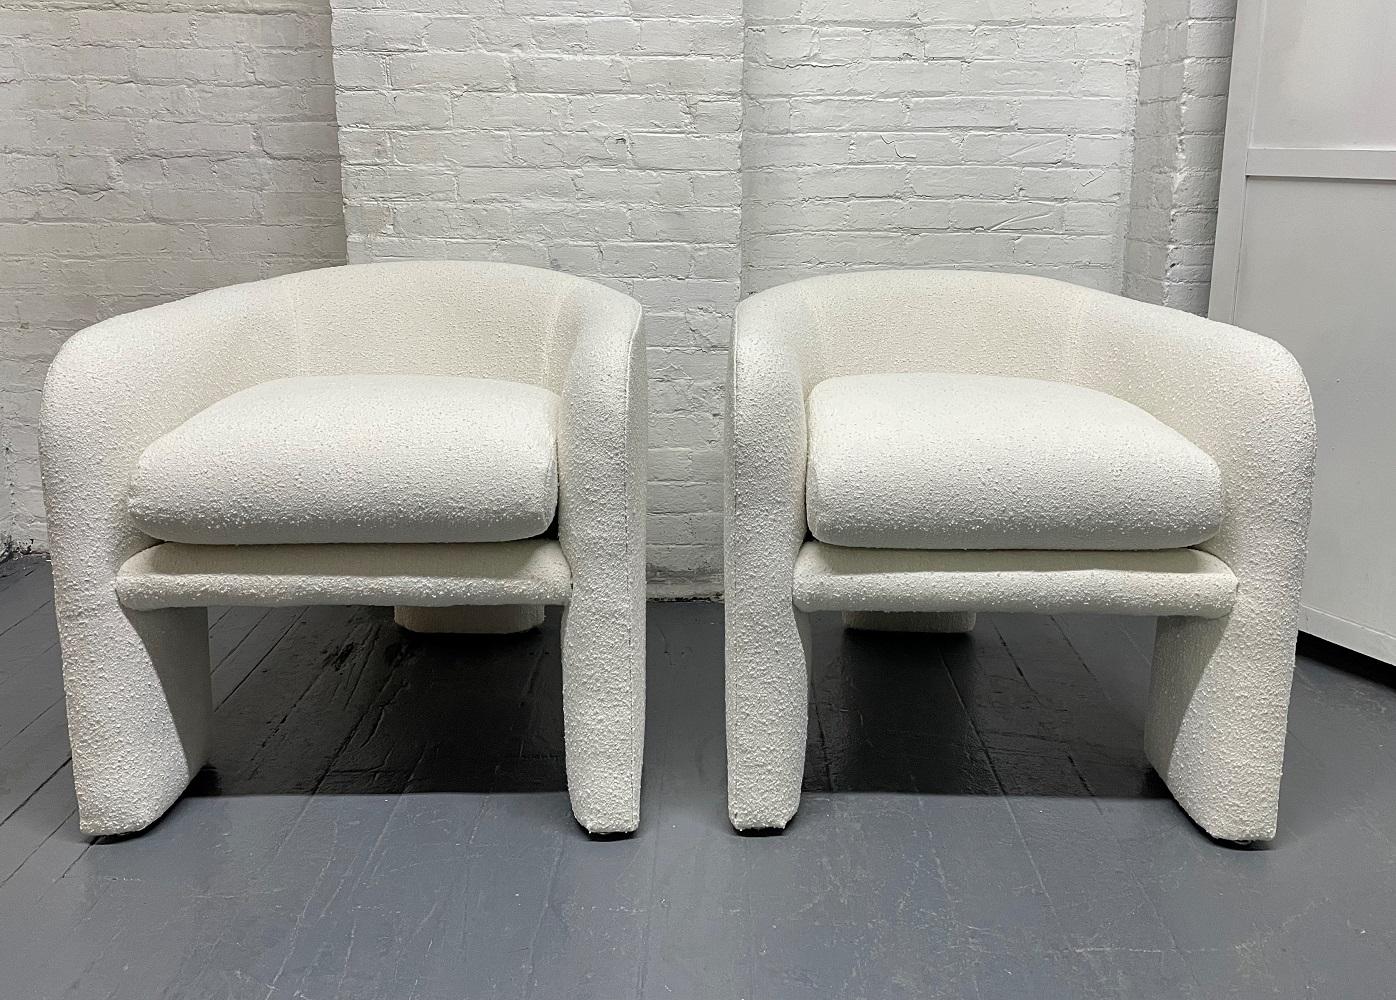 Pair of upholstered three-legged sculptural lounge chairs in Bouclé by Weiman / Preview.